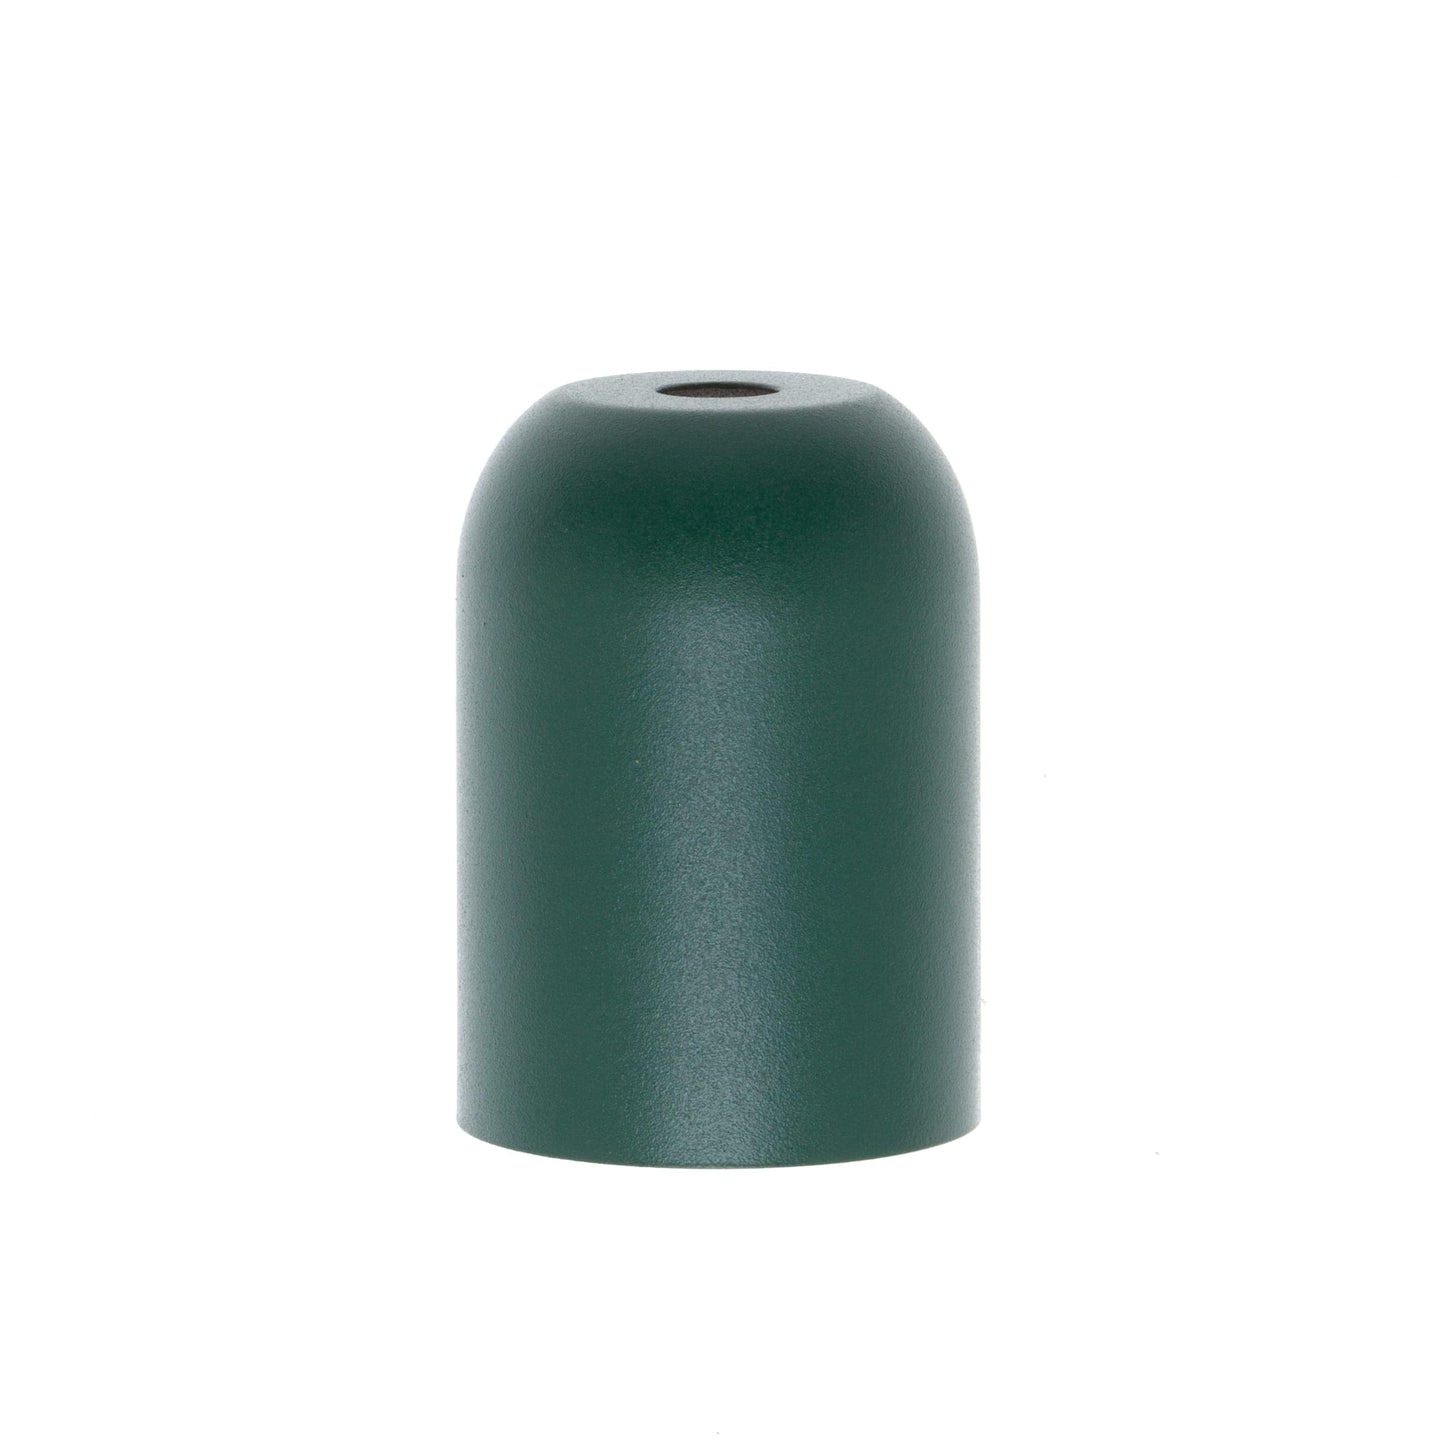 Rounded Metal Socket Cover